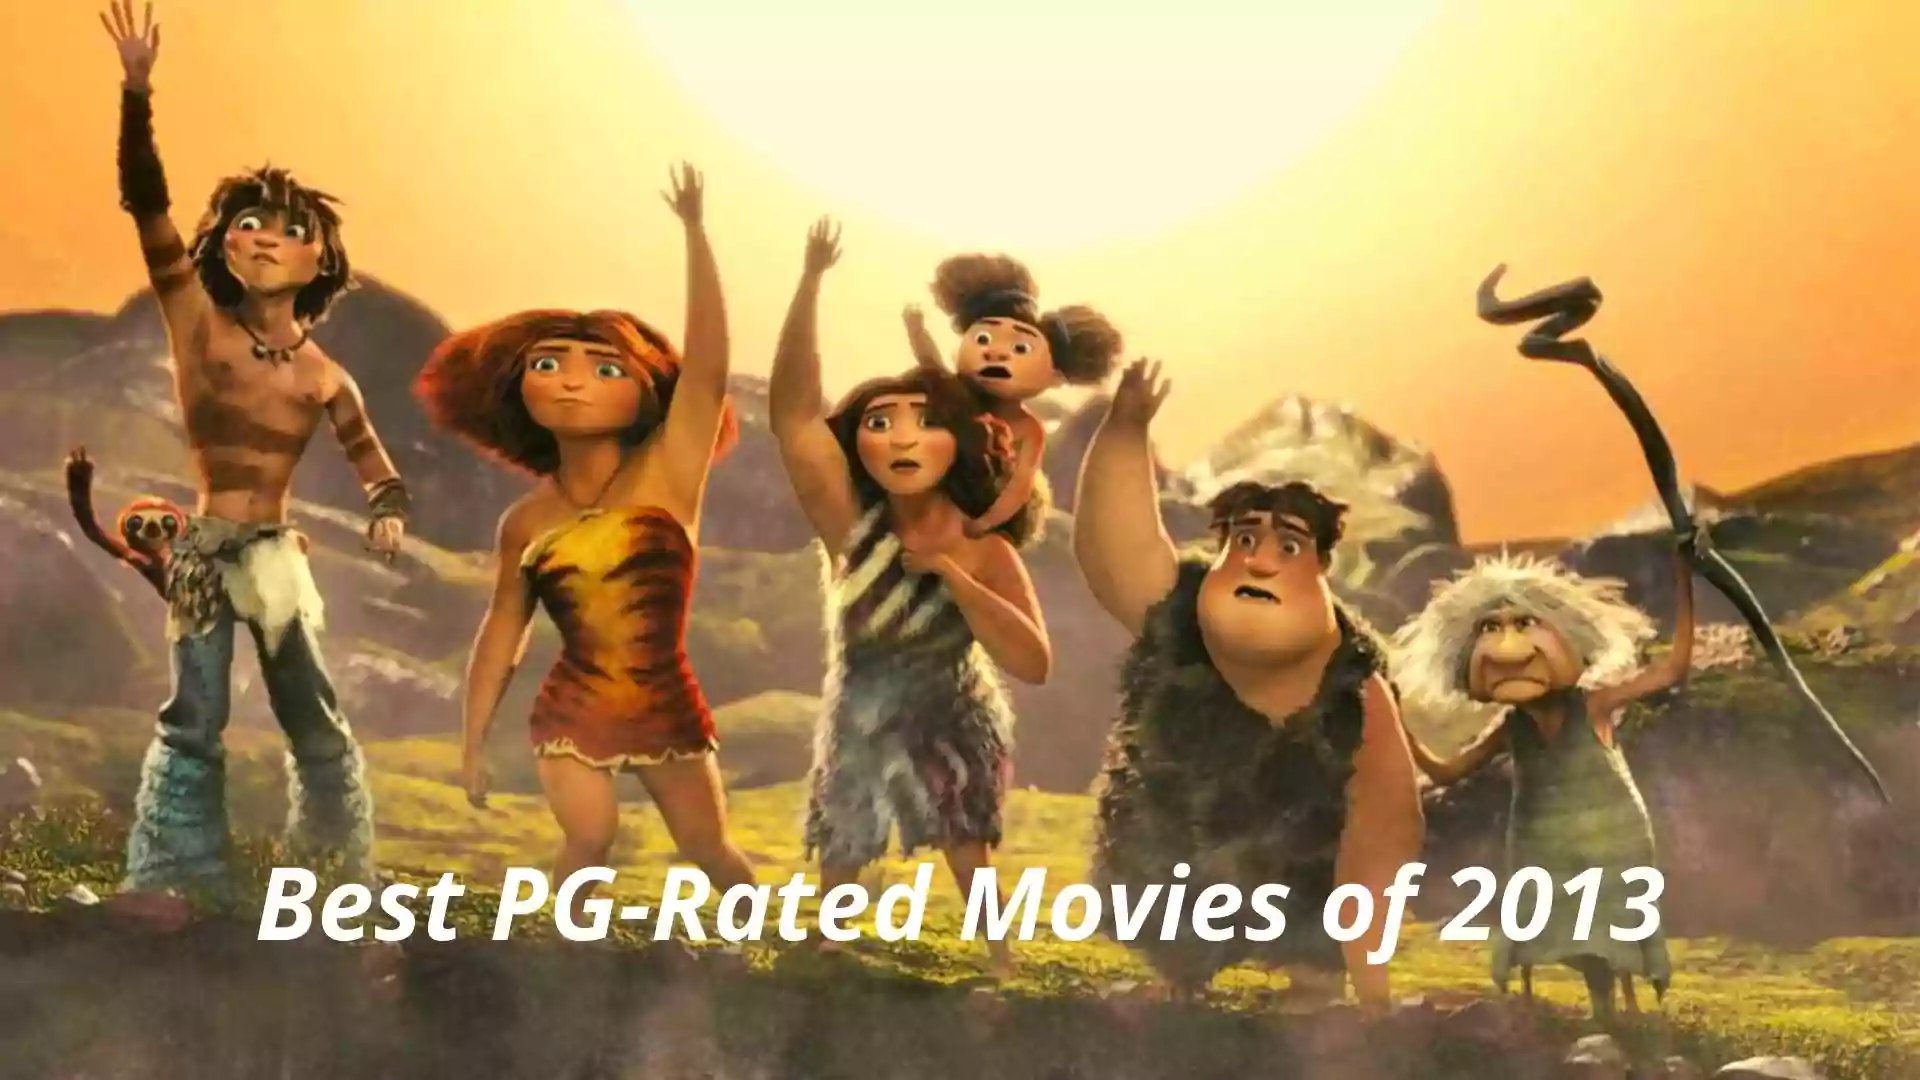 Best PG-Rated Movies of 2013